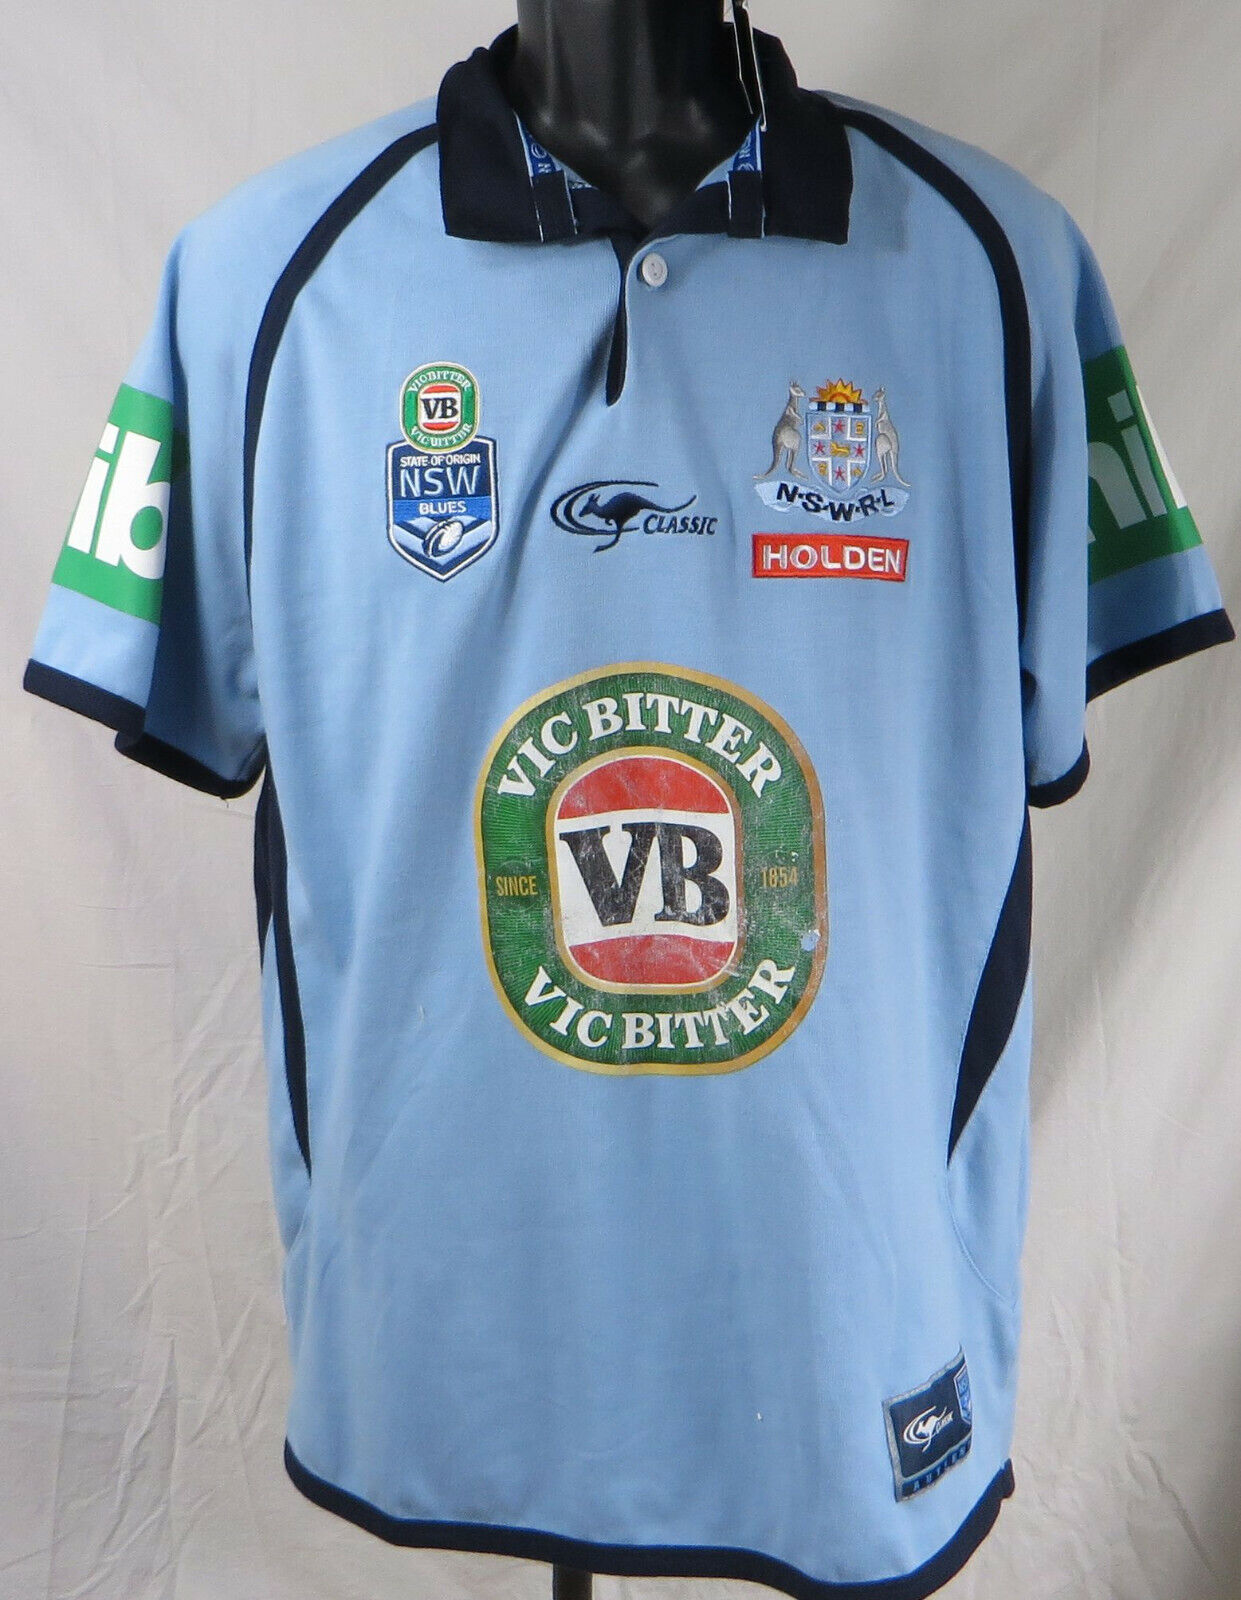 Mens NOS 2009 Authentics NSW Blues Holden Jersey w/ tags Vic Bitter Size Large  NSW Does Not Apply